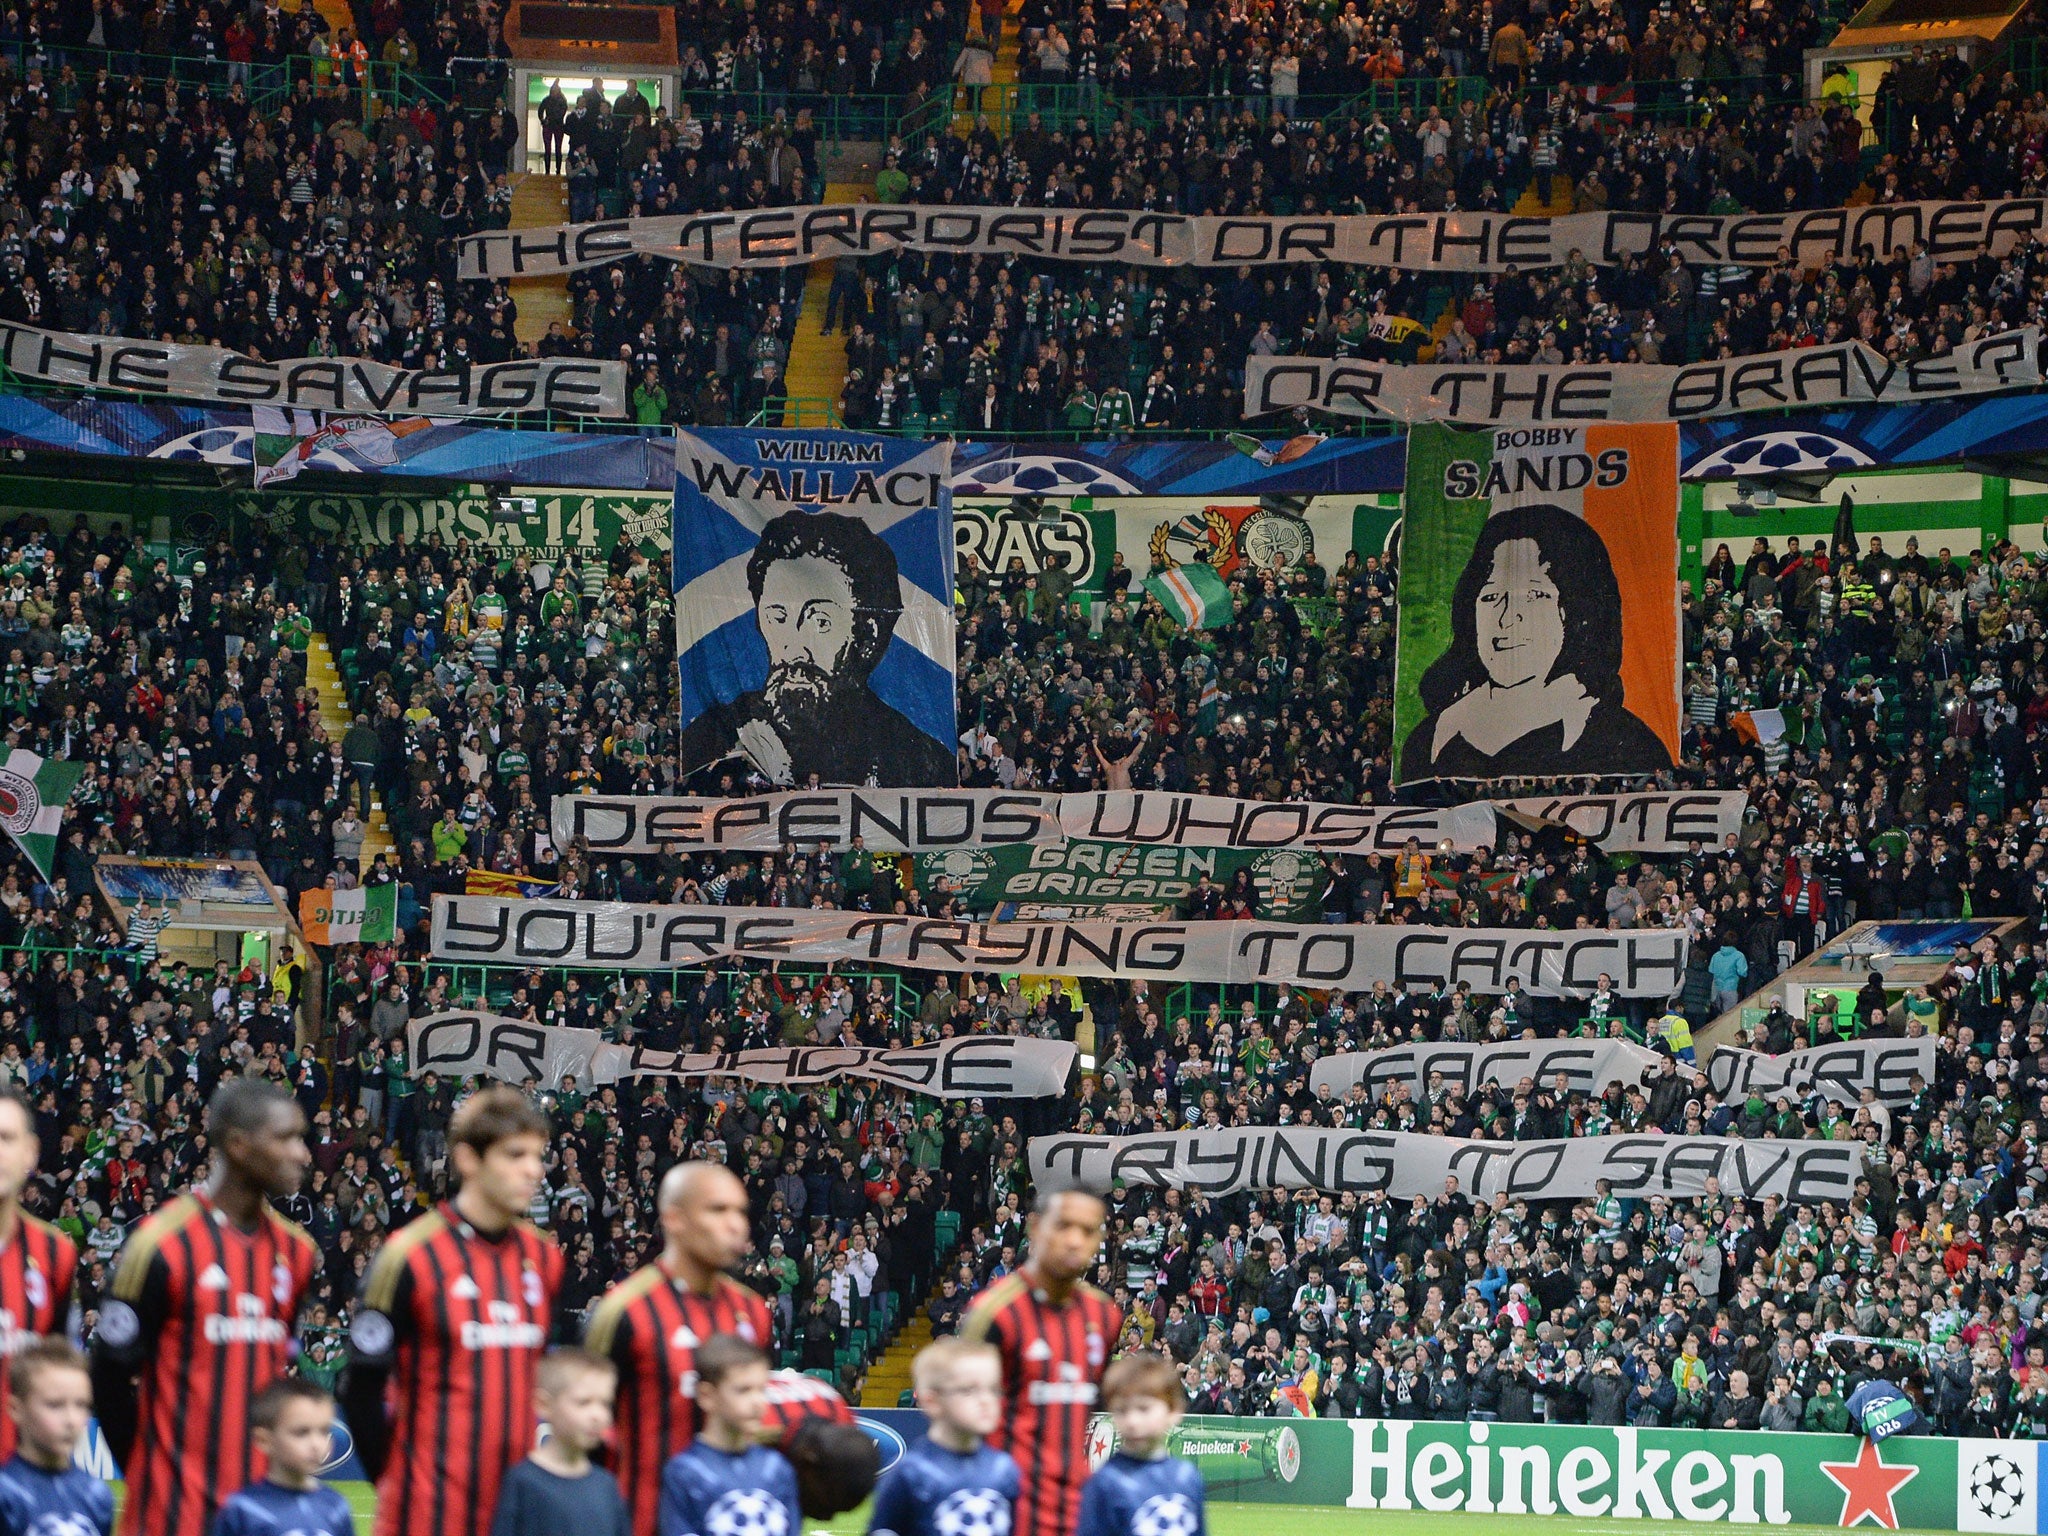 Celtic fans display controversial banners which has seen Uefa take disciplinary action against the Scottish club